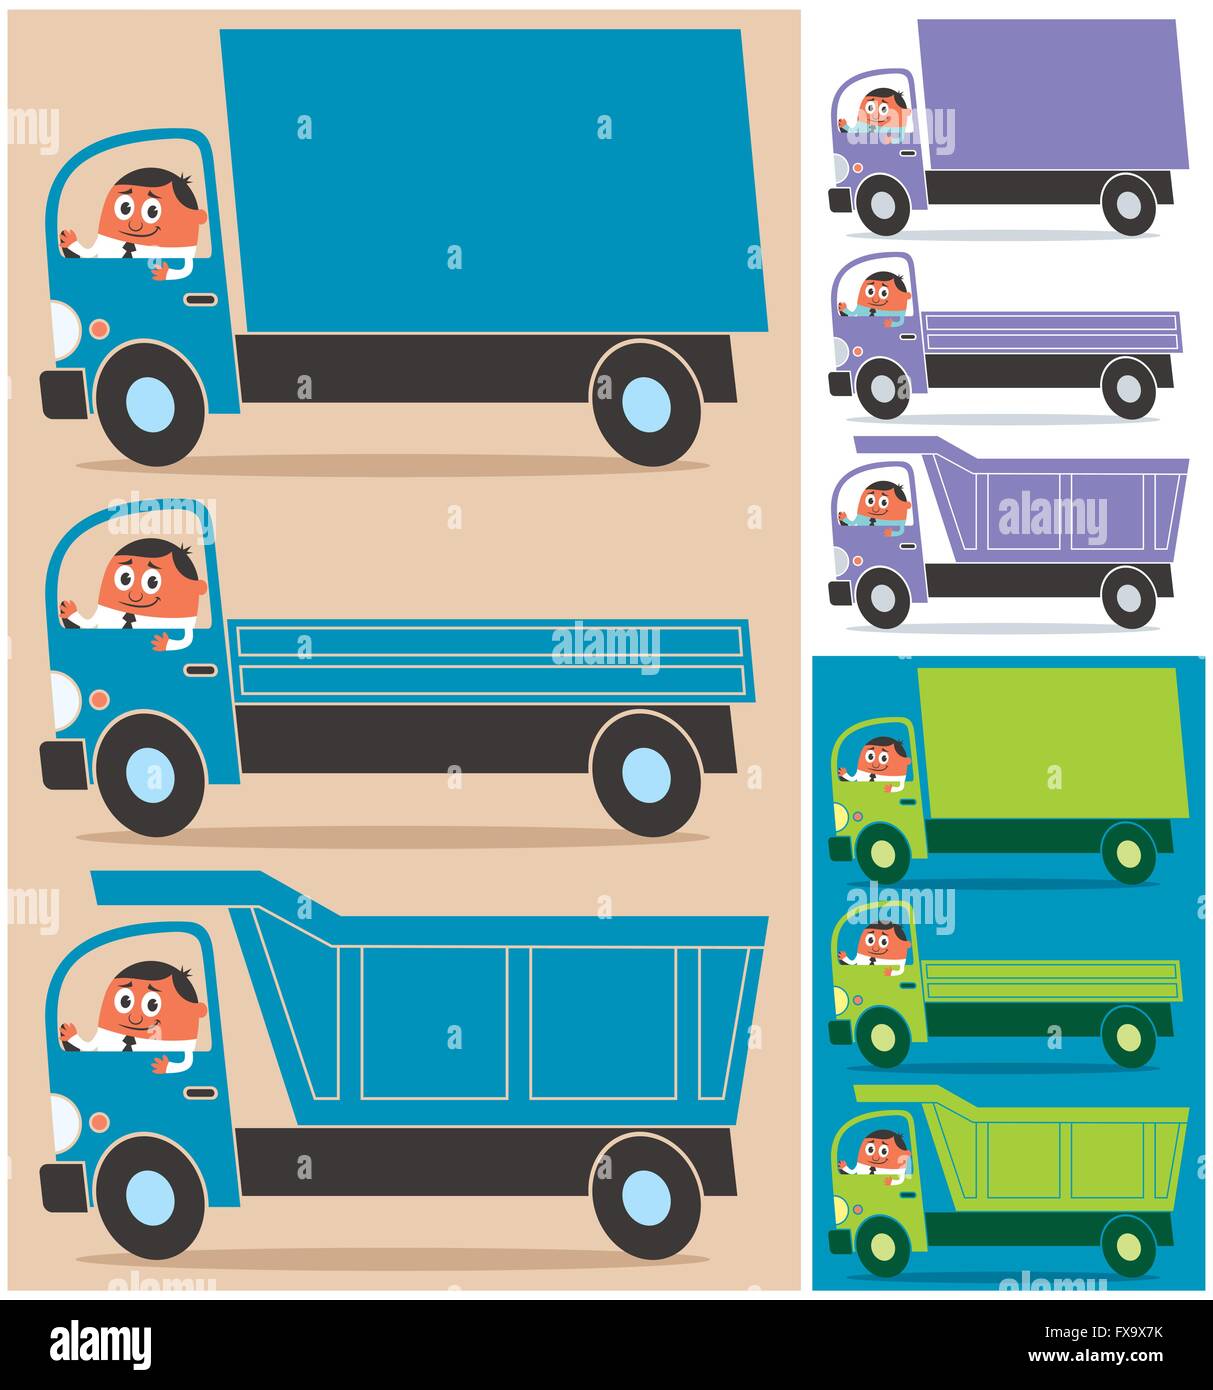 Cartoon character driving 3 types of trucks. Each truck is in 3 color versions. Stock Vector